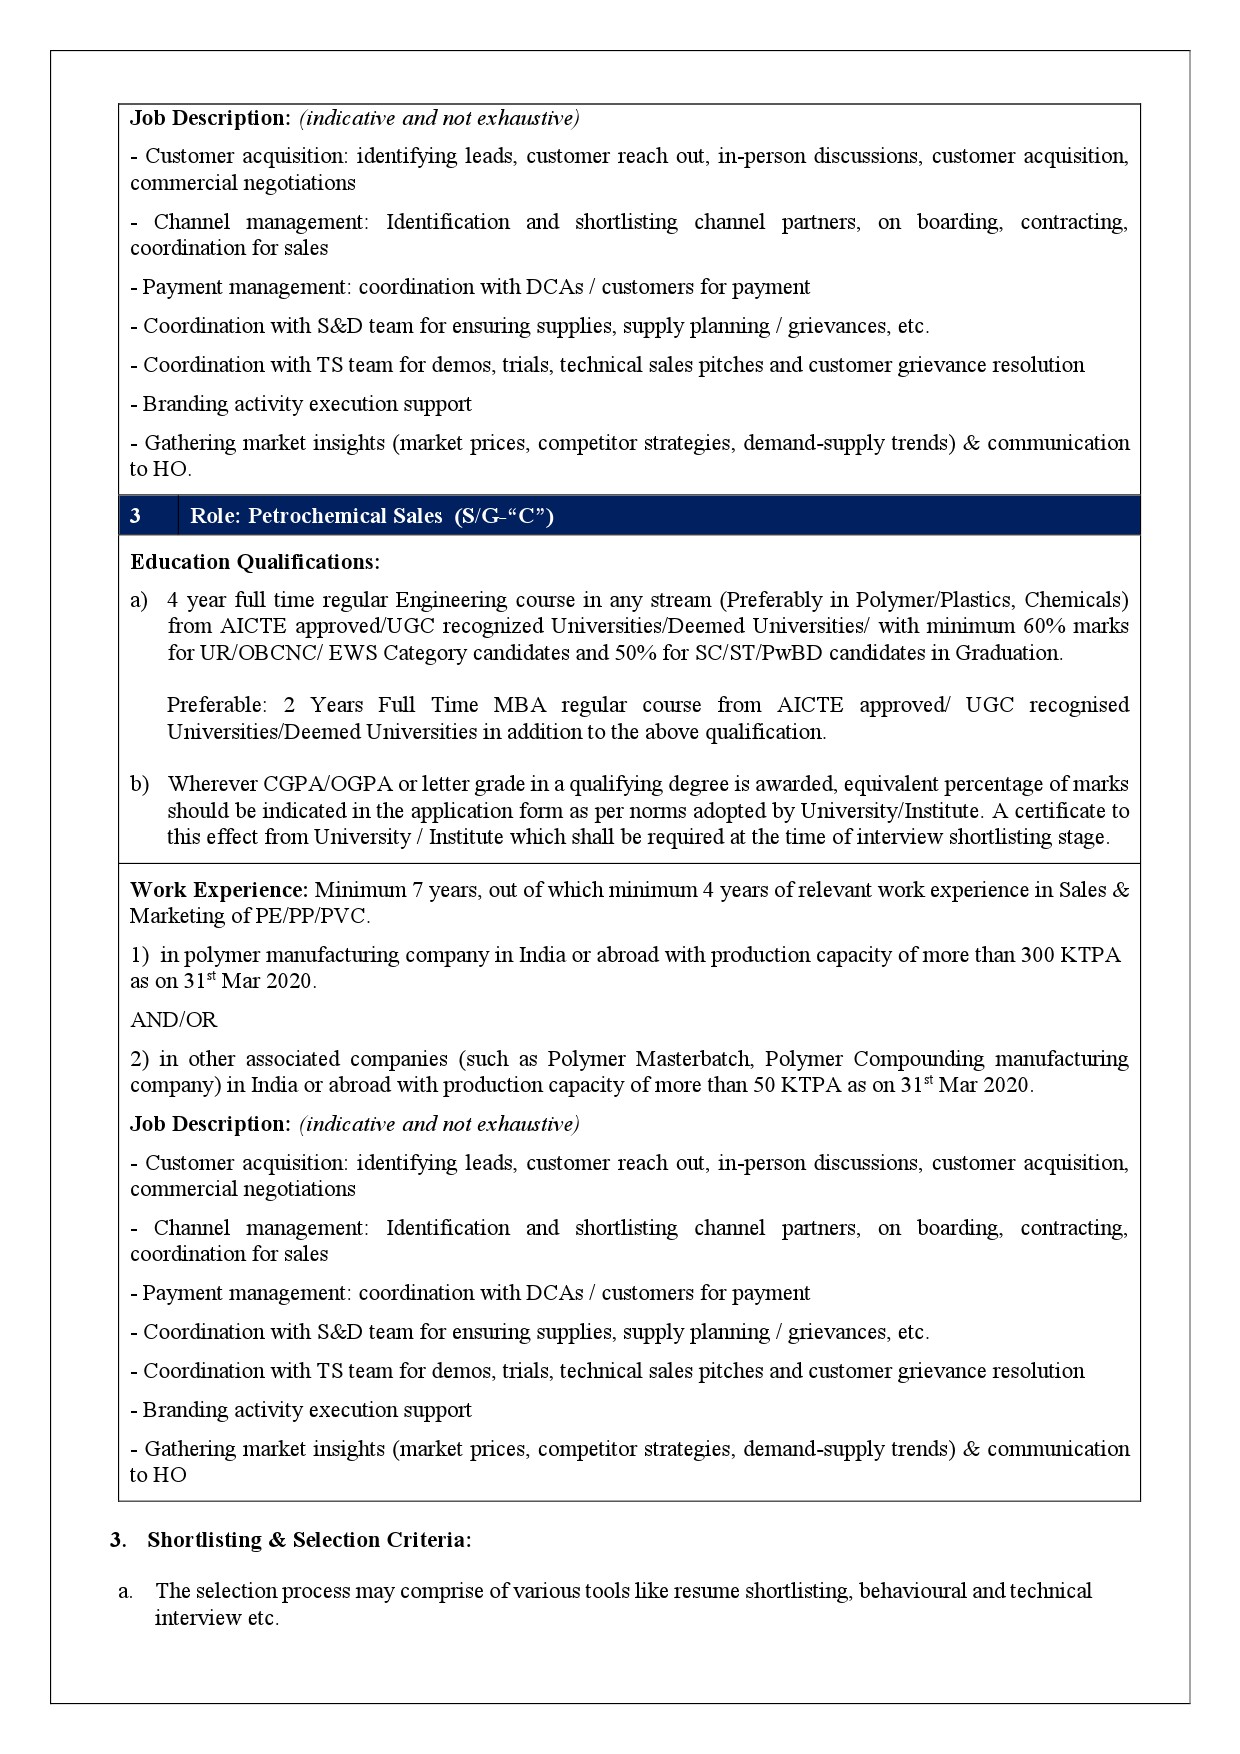 Technical Services and Petrochemical Sales in HPCL - Notification Image 3